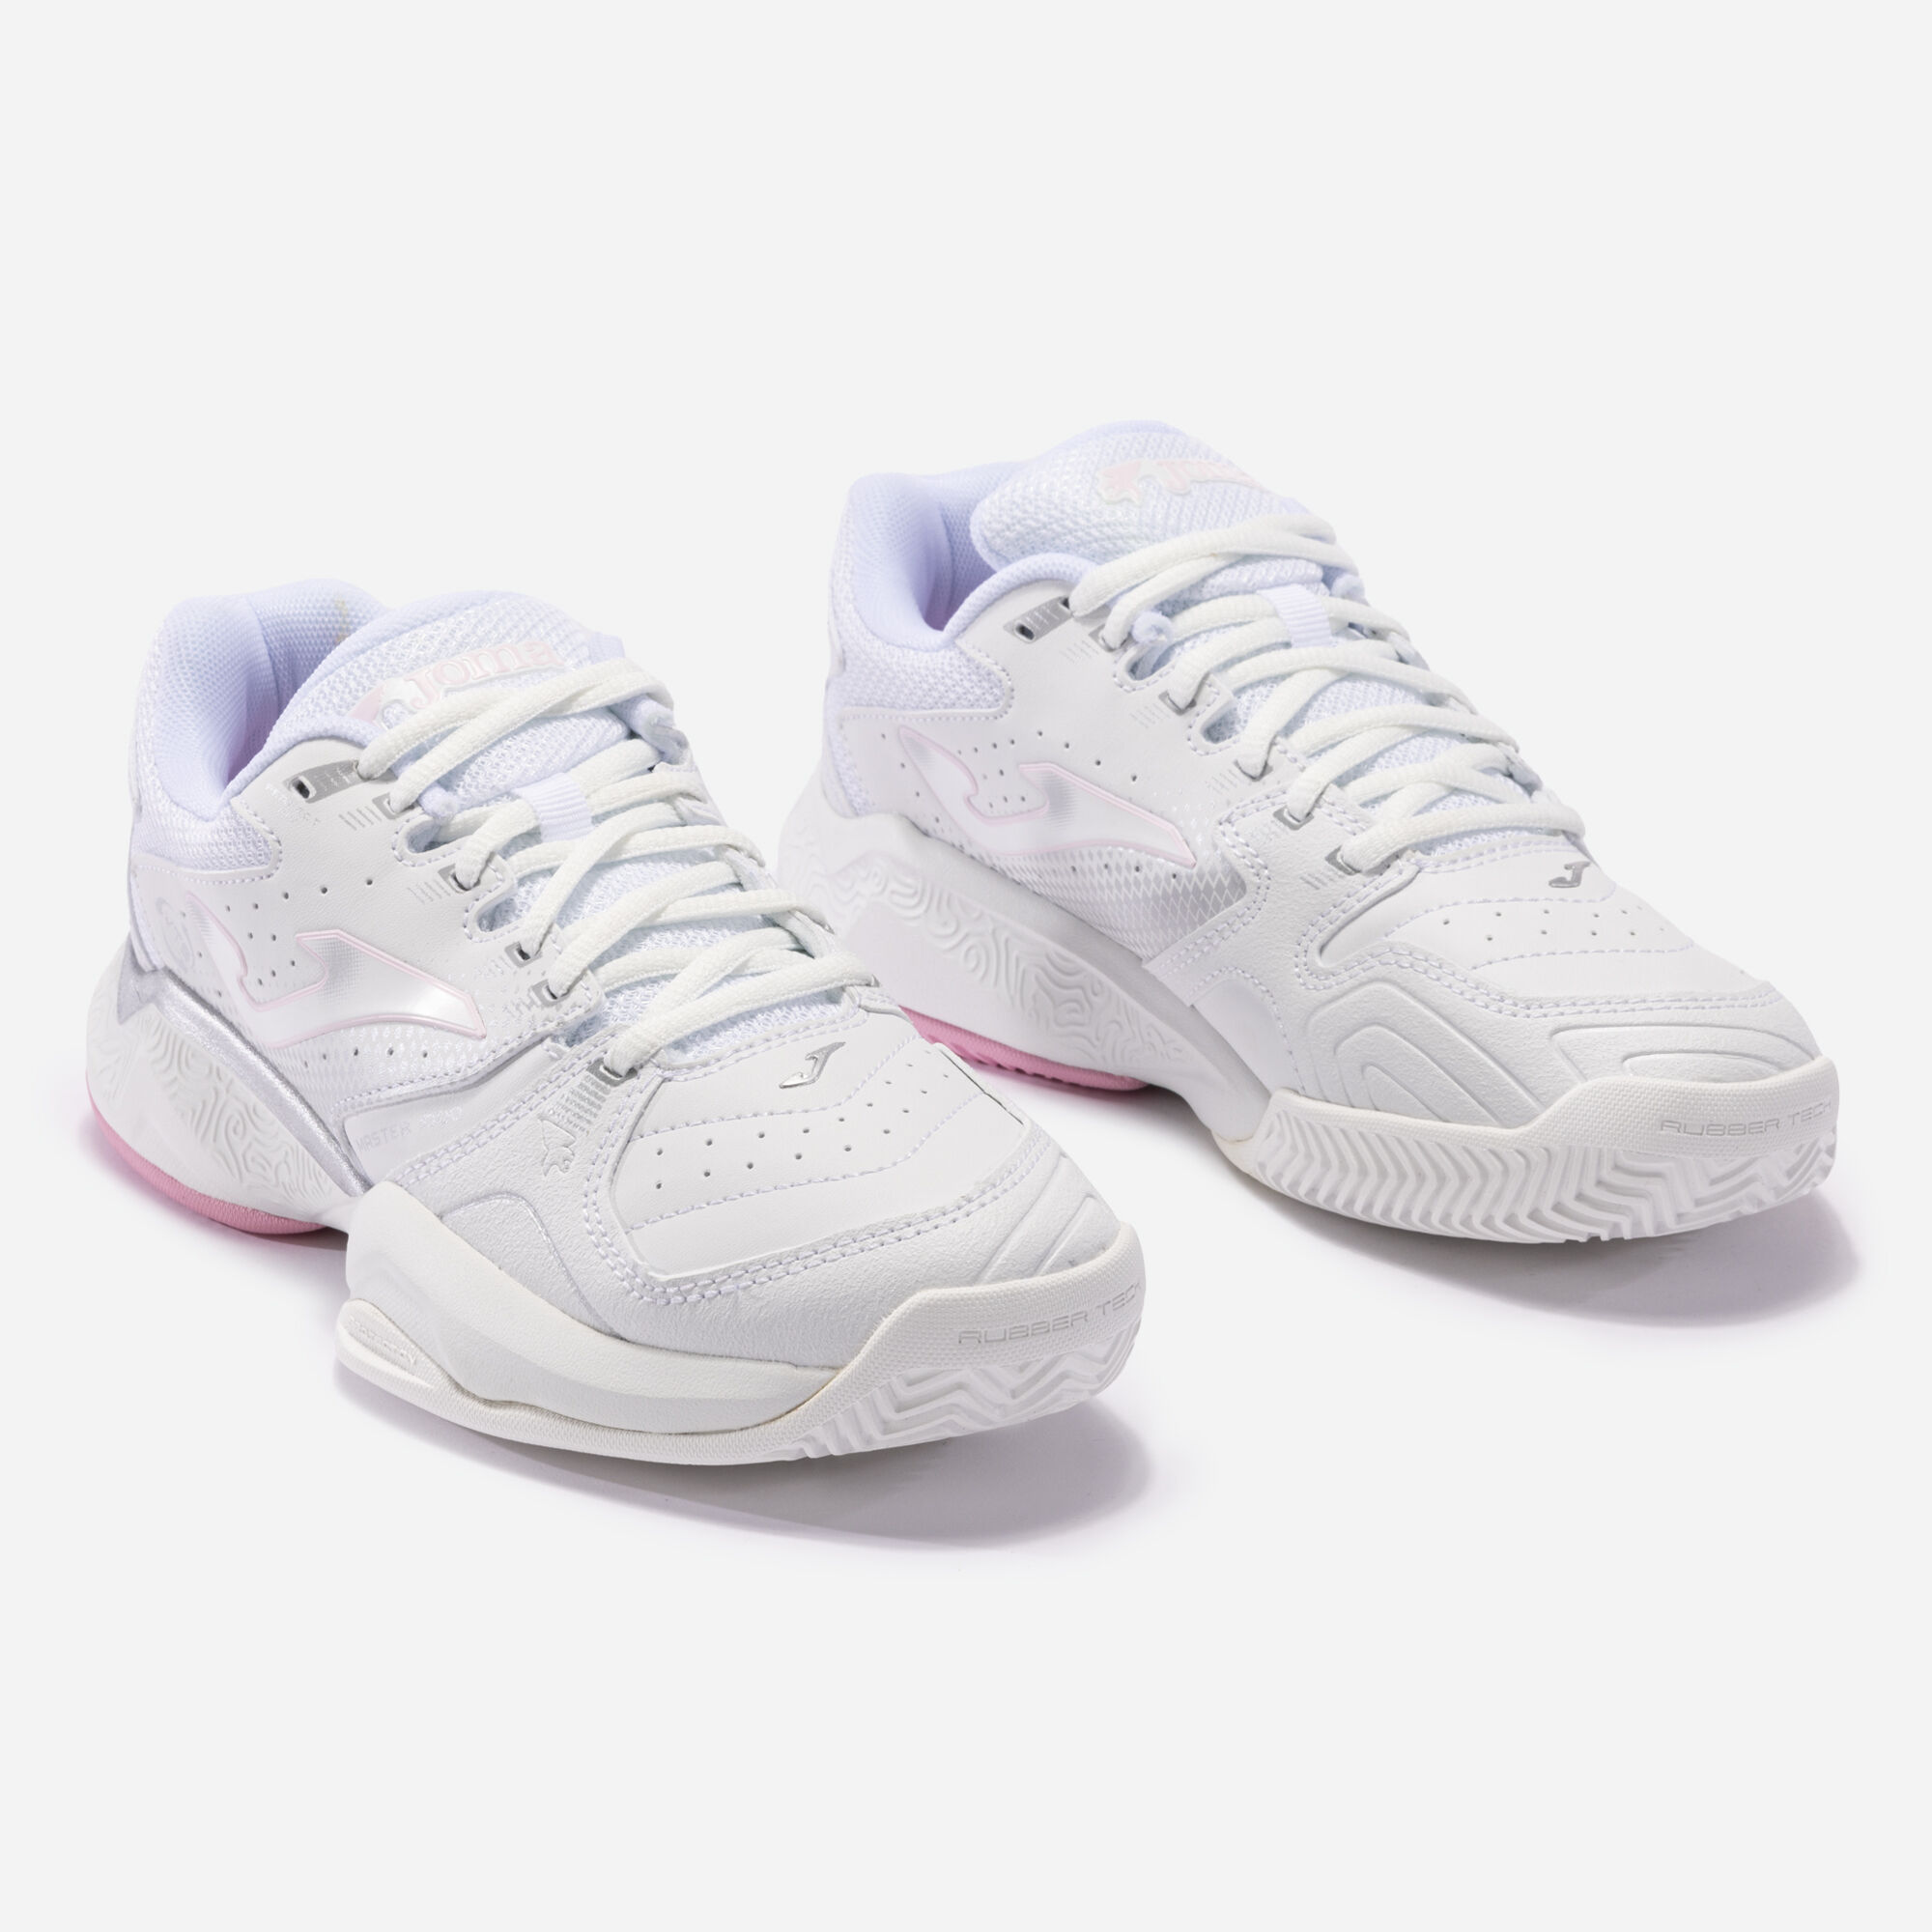 Chaussures T.Master 1000 Lady 23 terre battue femme blanc rose